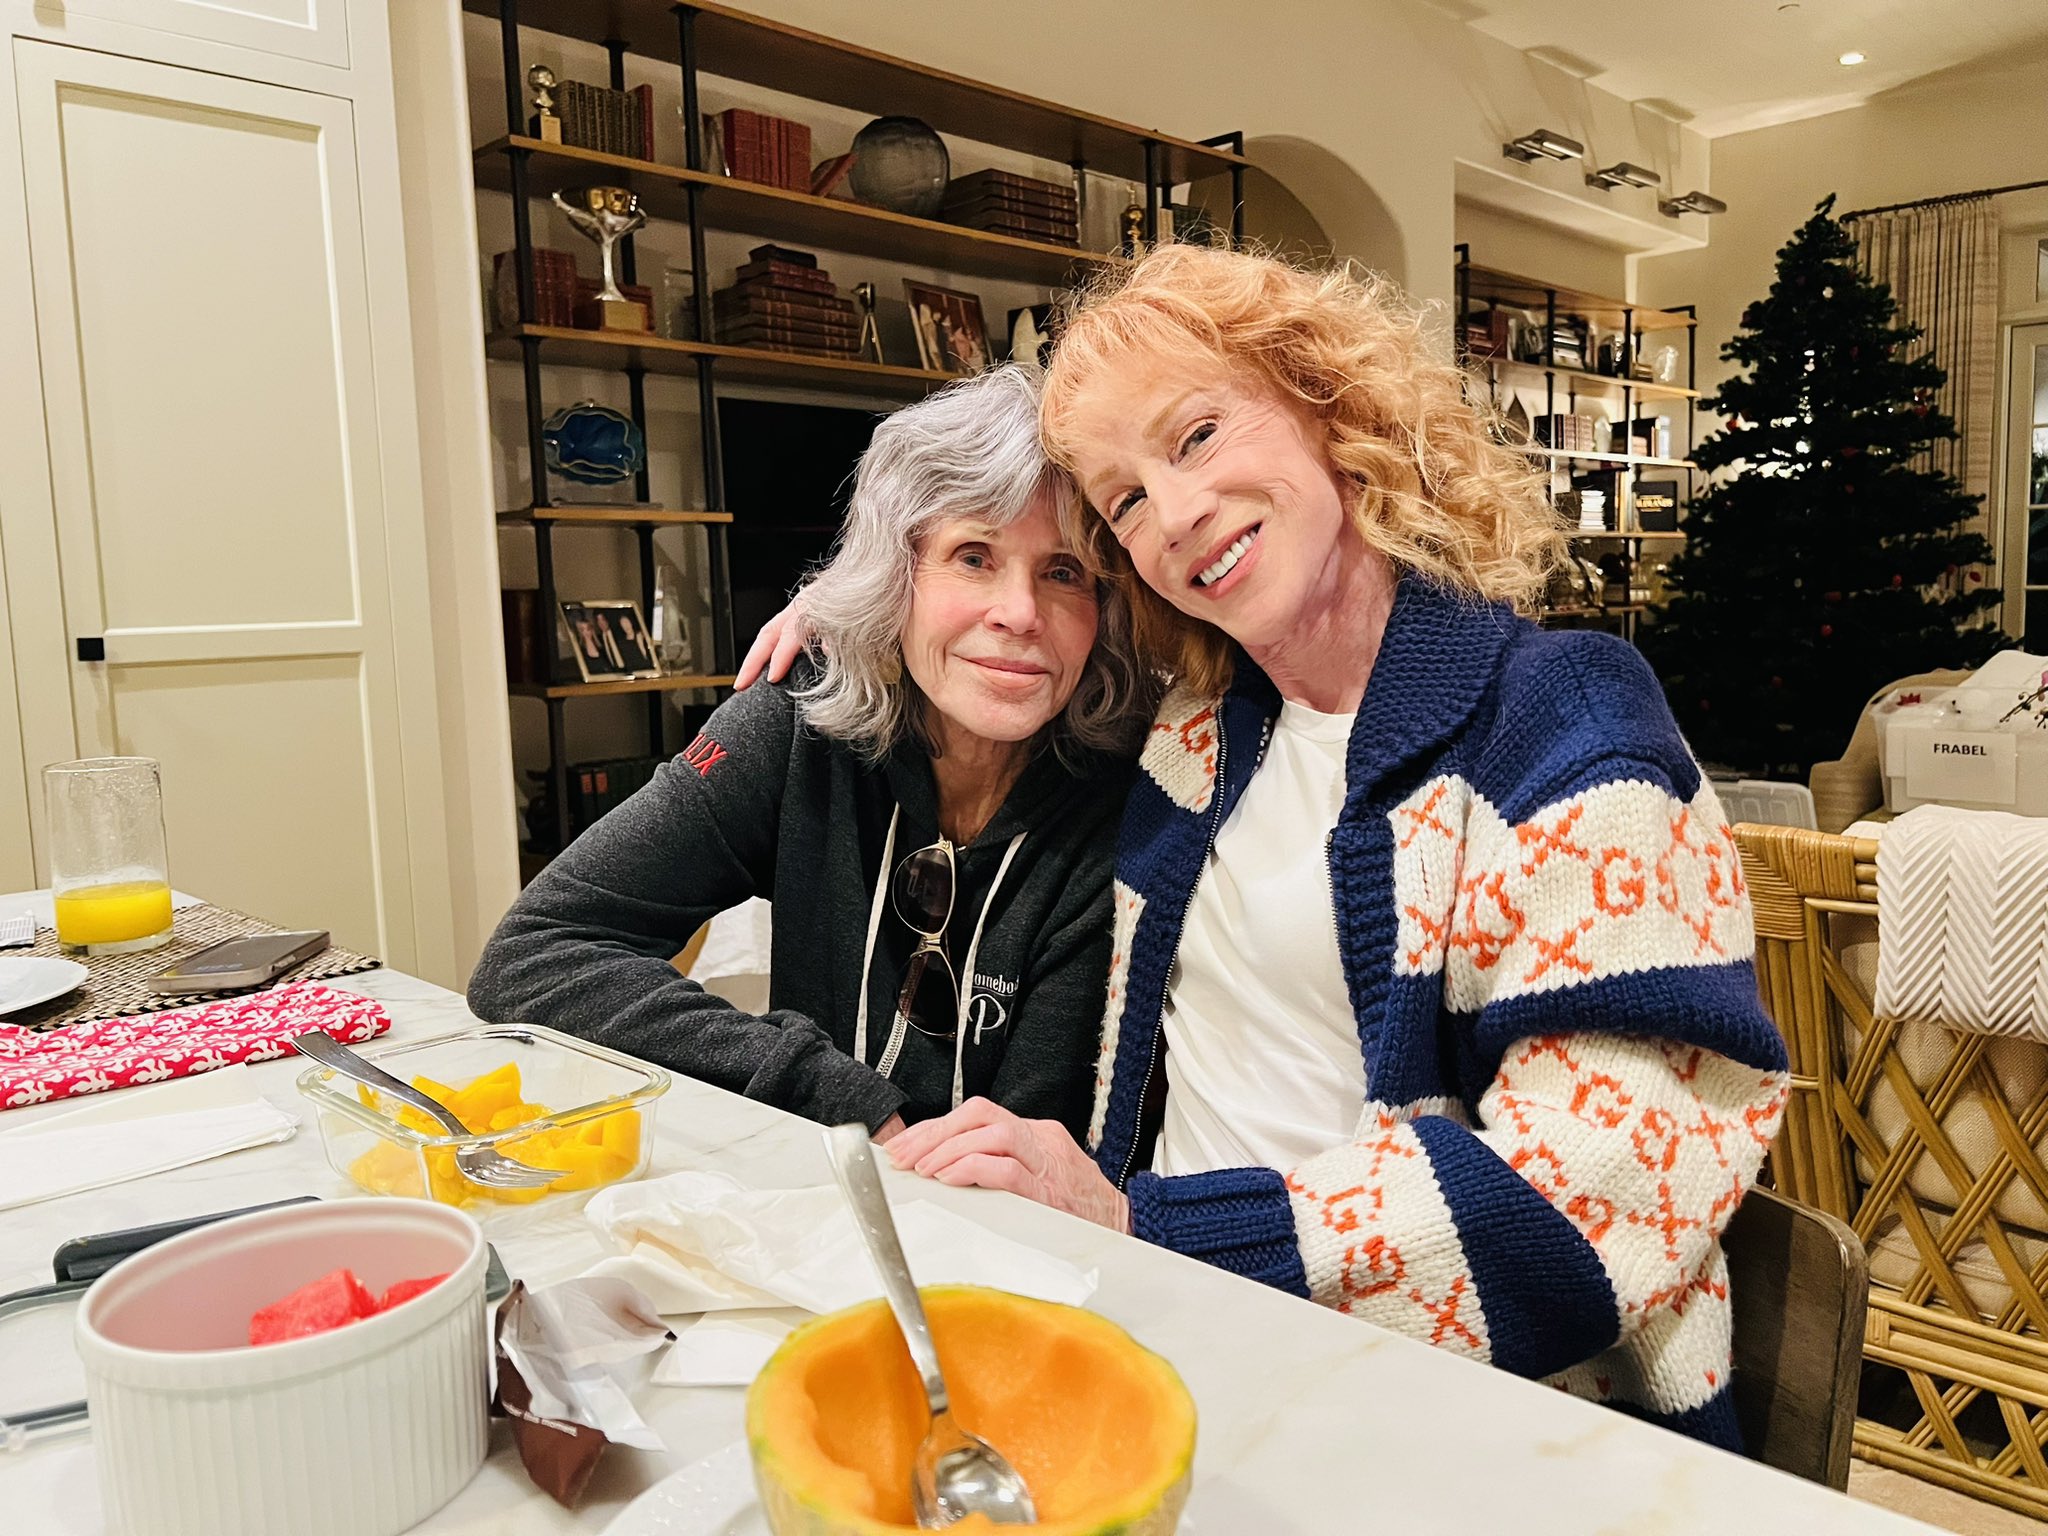 The comedian sought comfort from Jane Fonda